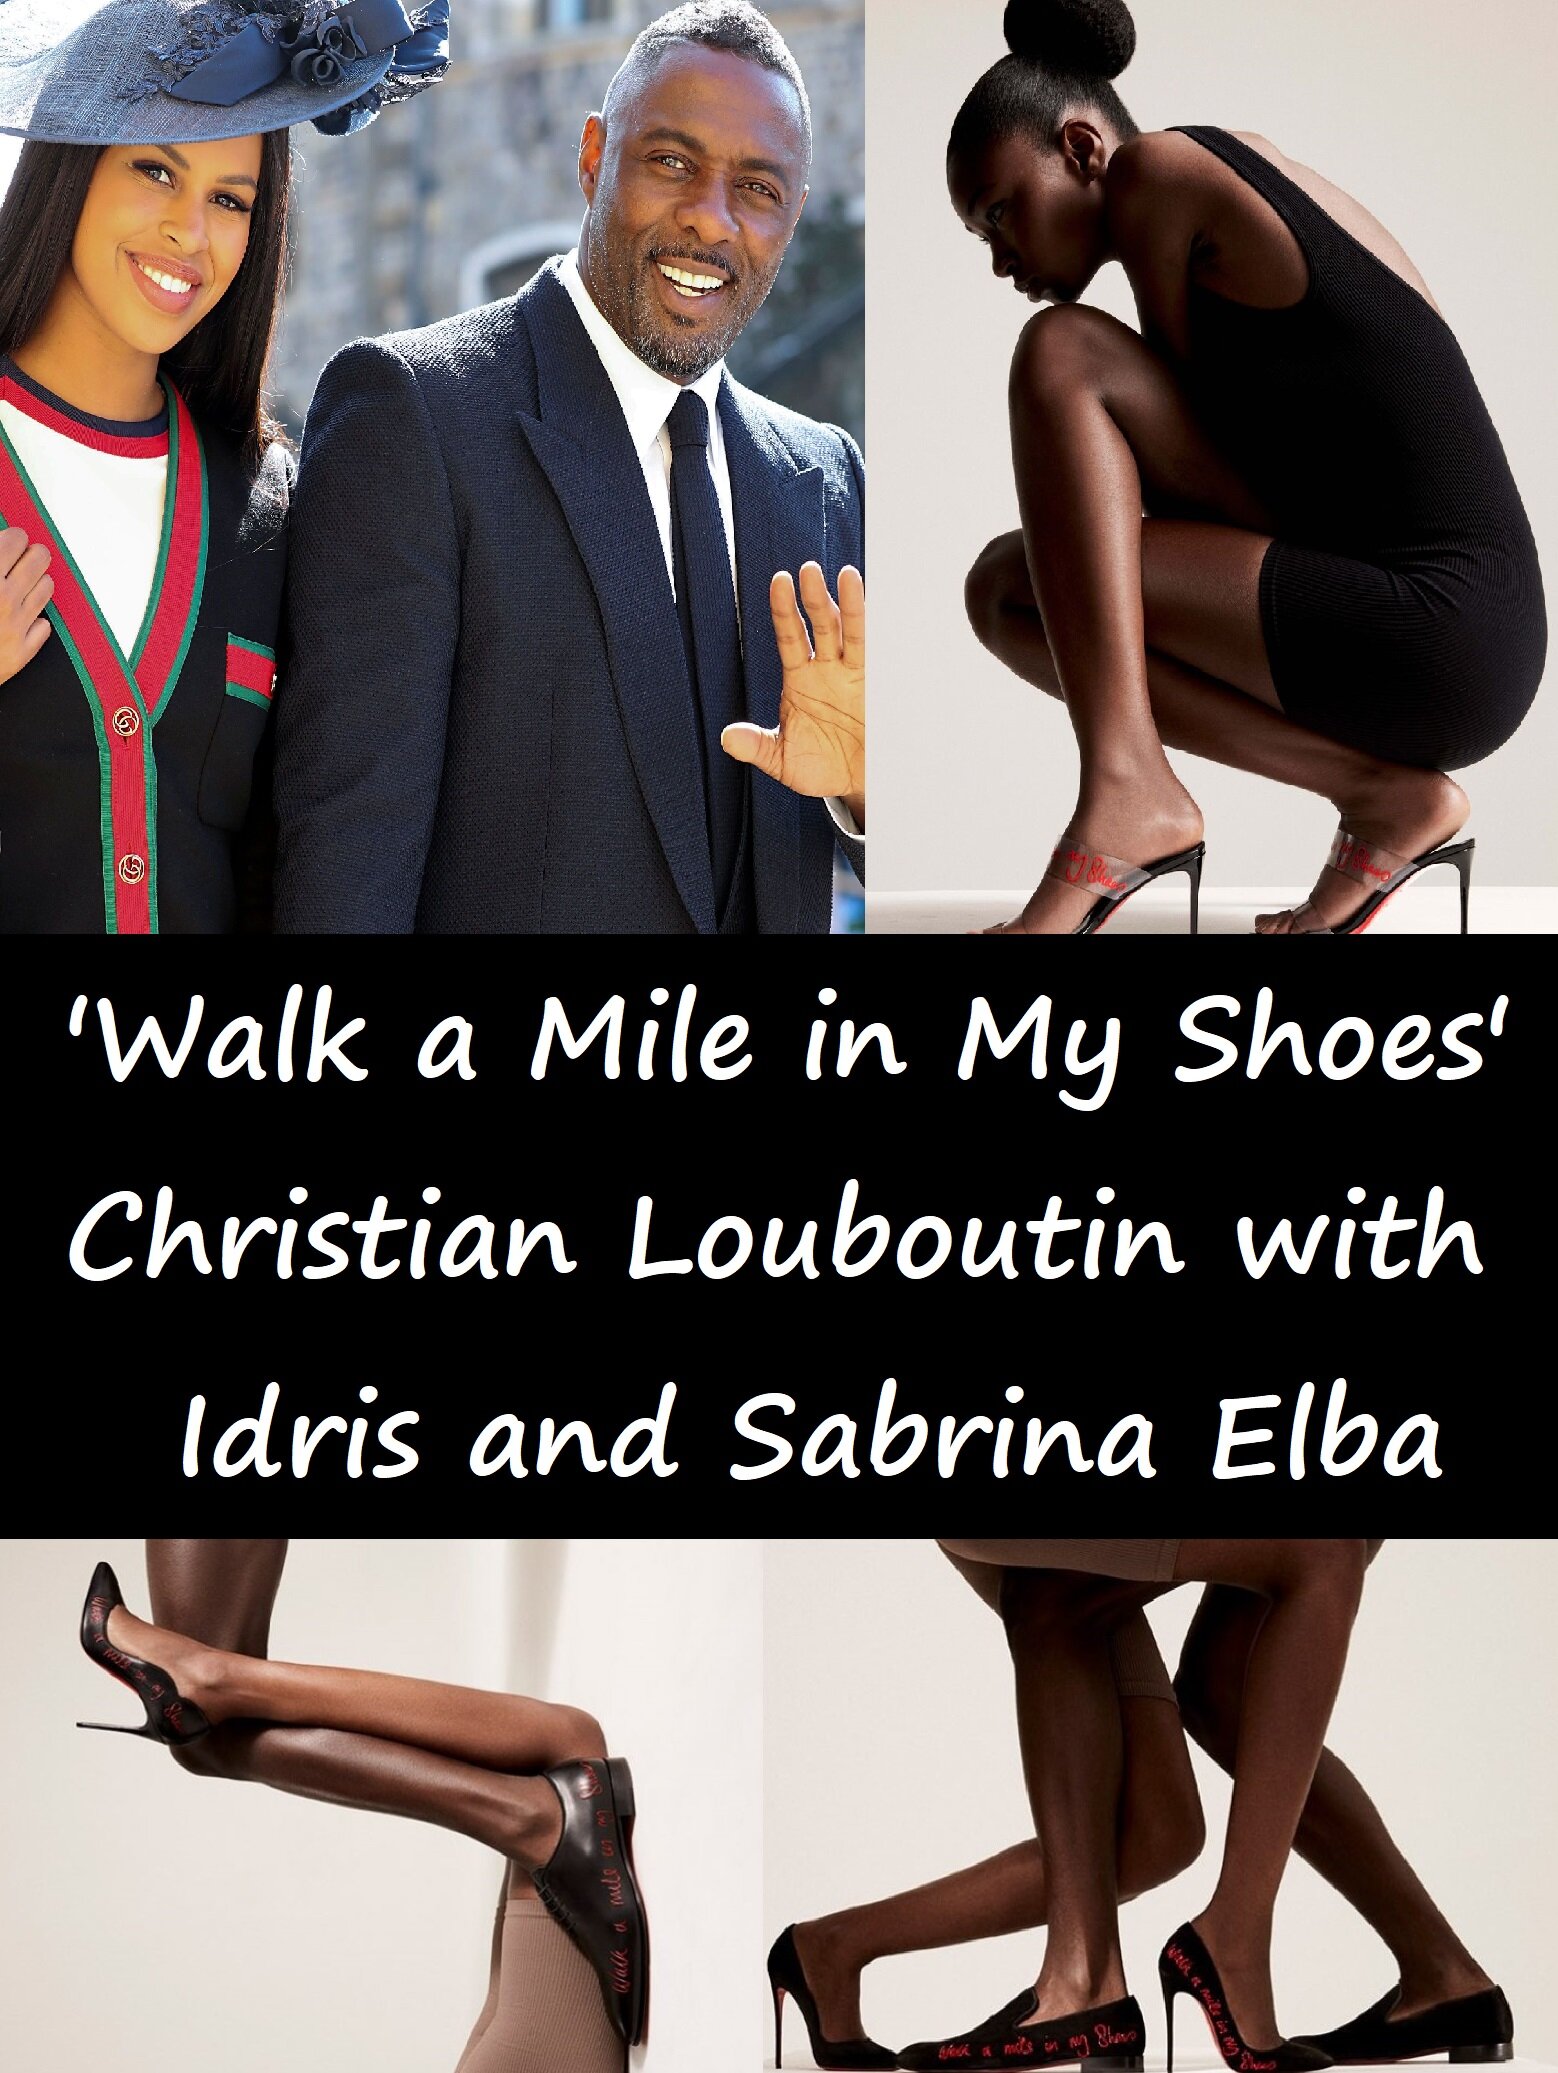 We are proud to announce that actor - Christian Louboutin